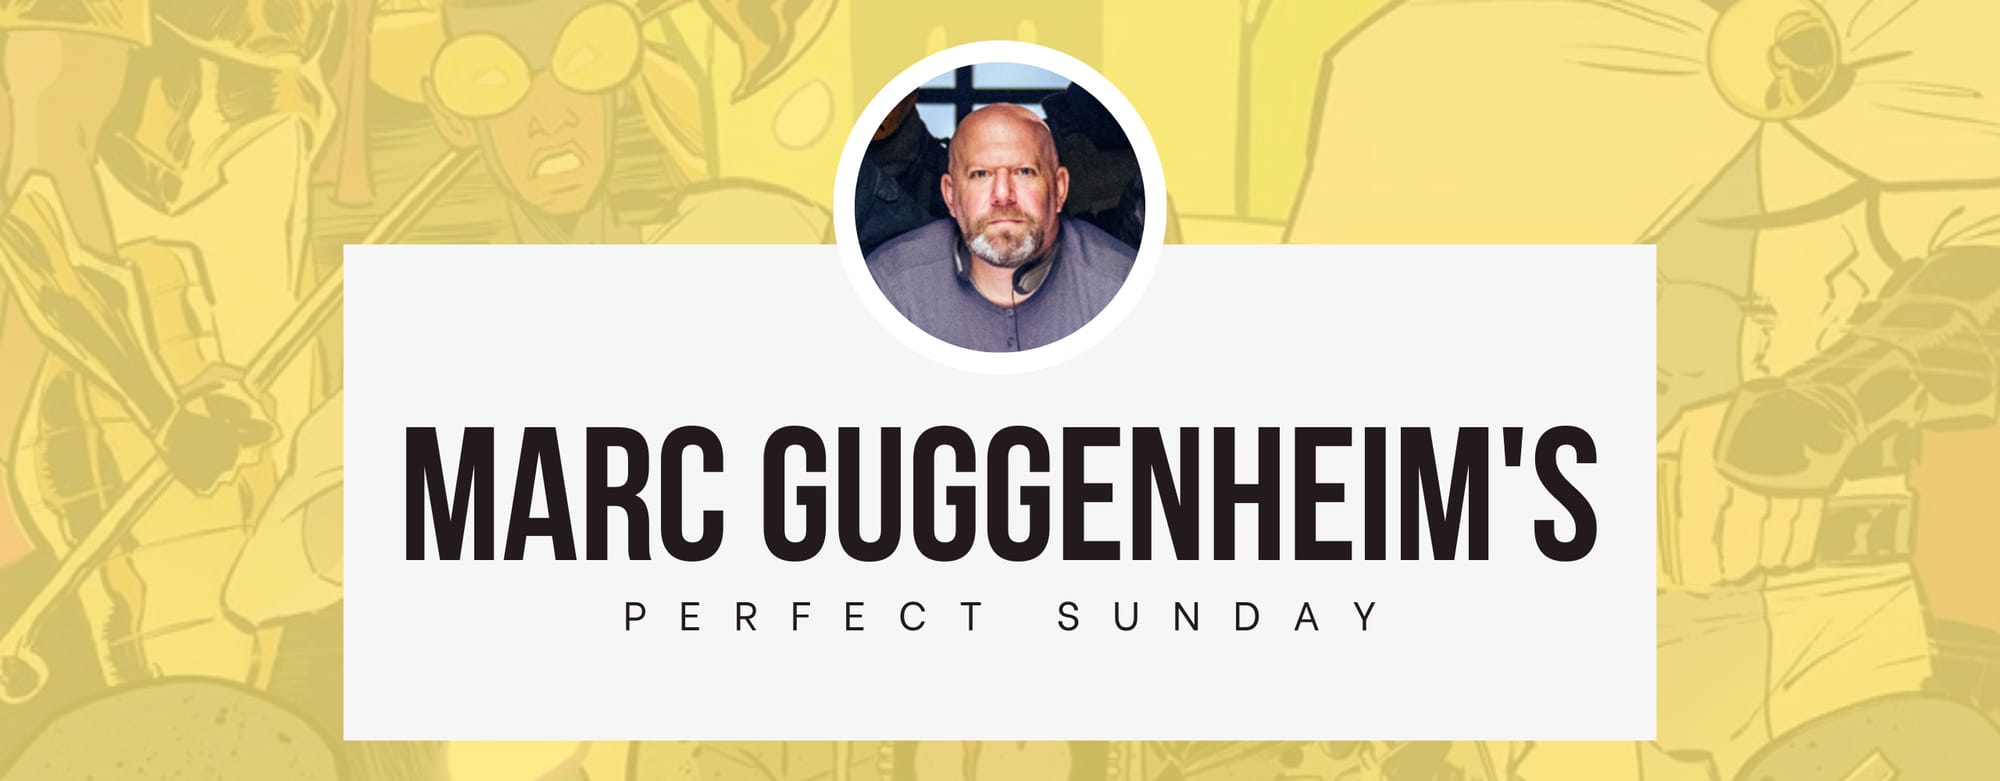 A perfect Sunday with... Marc Guggenheim